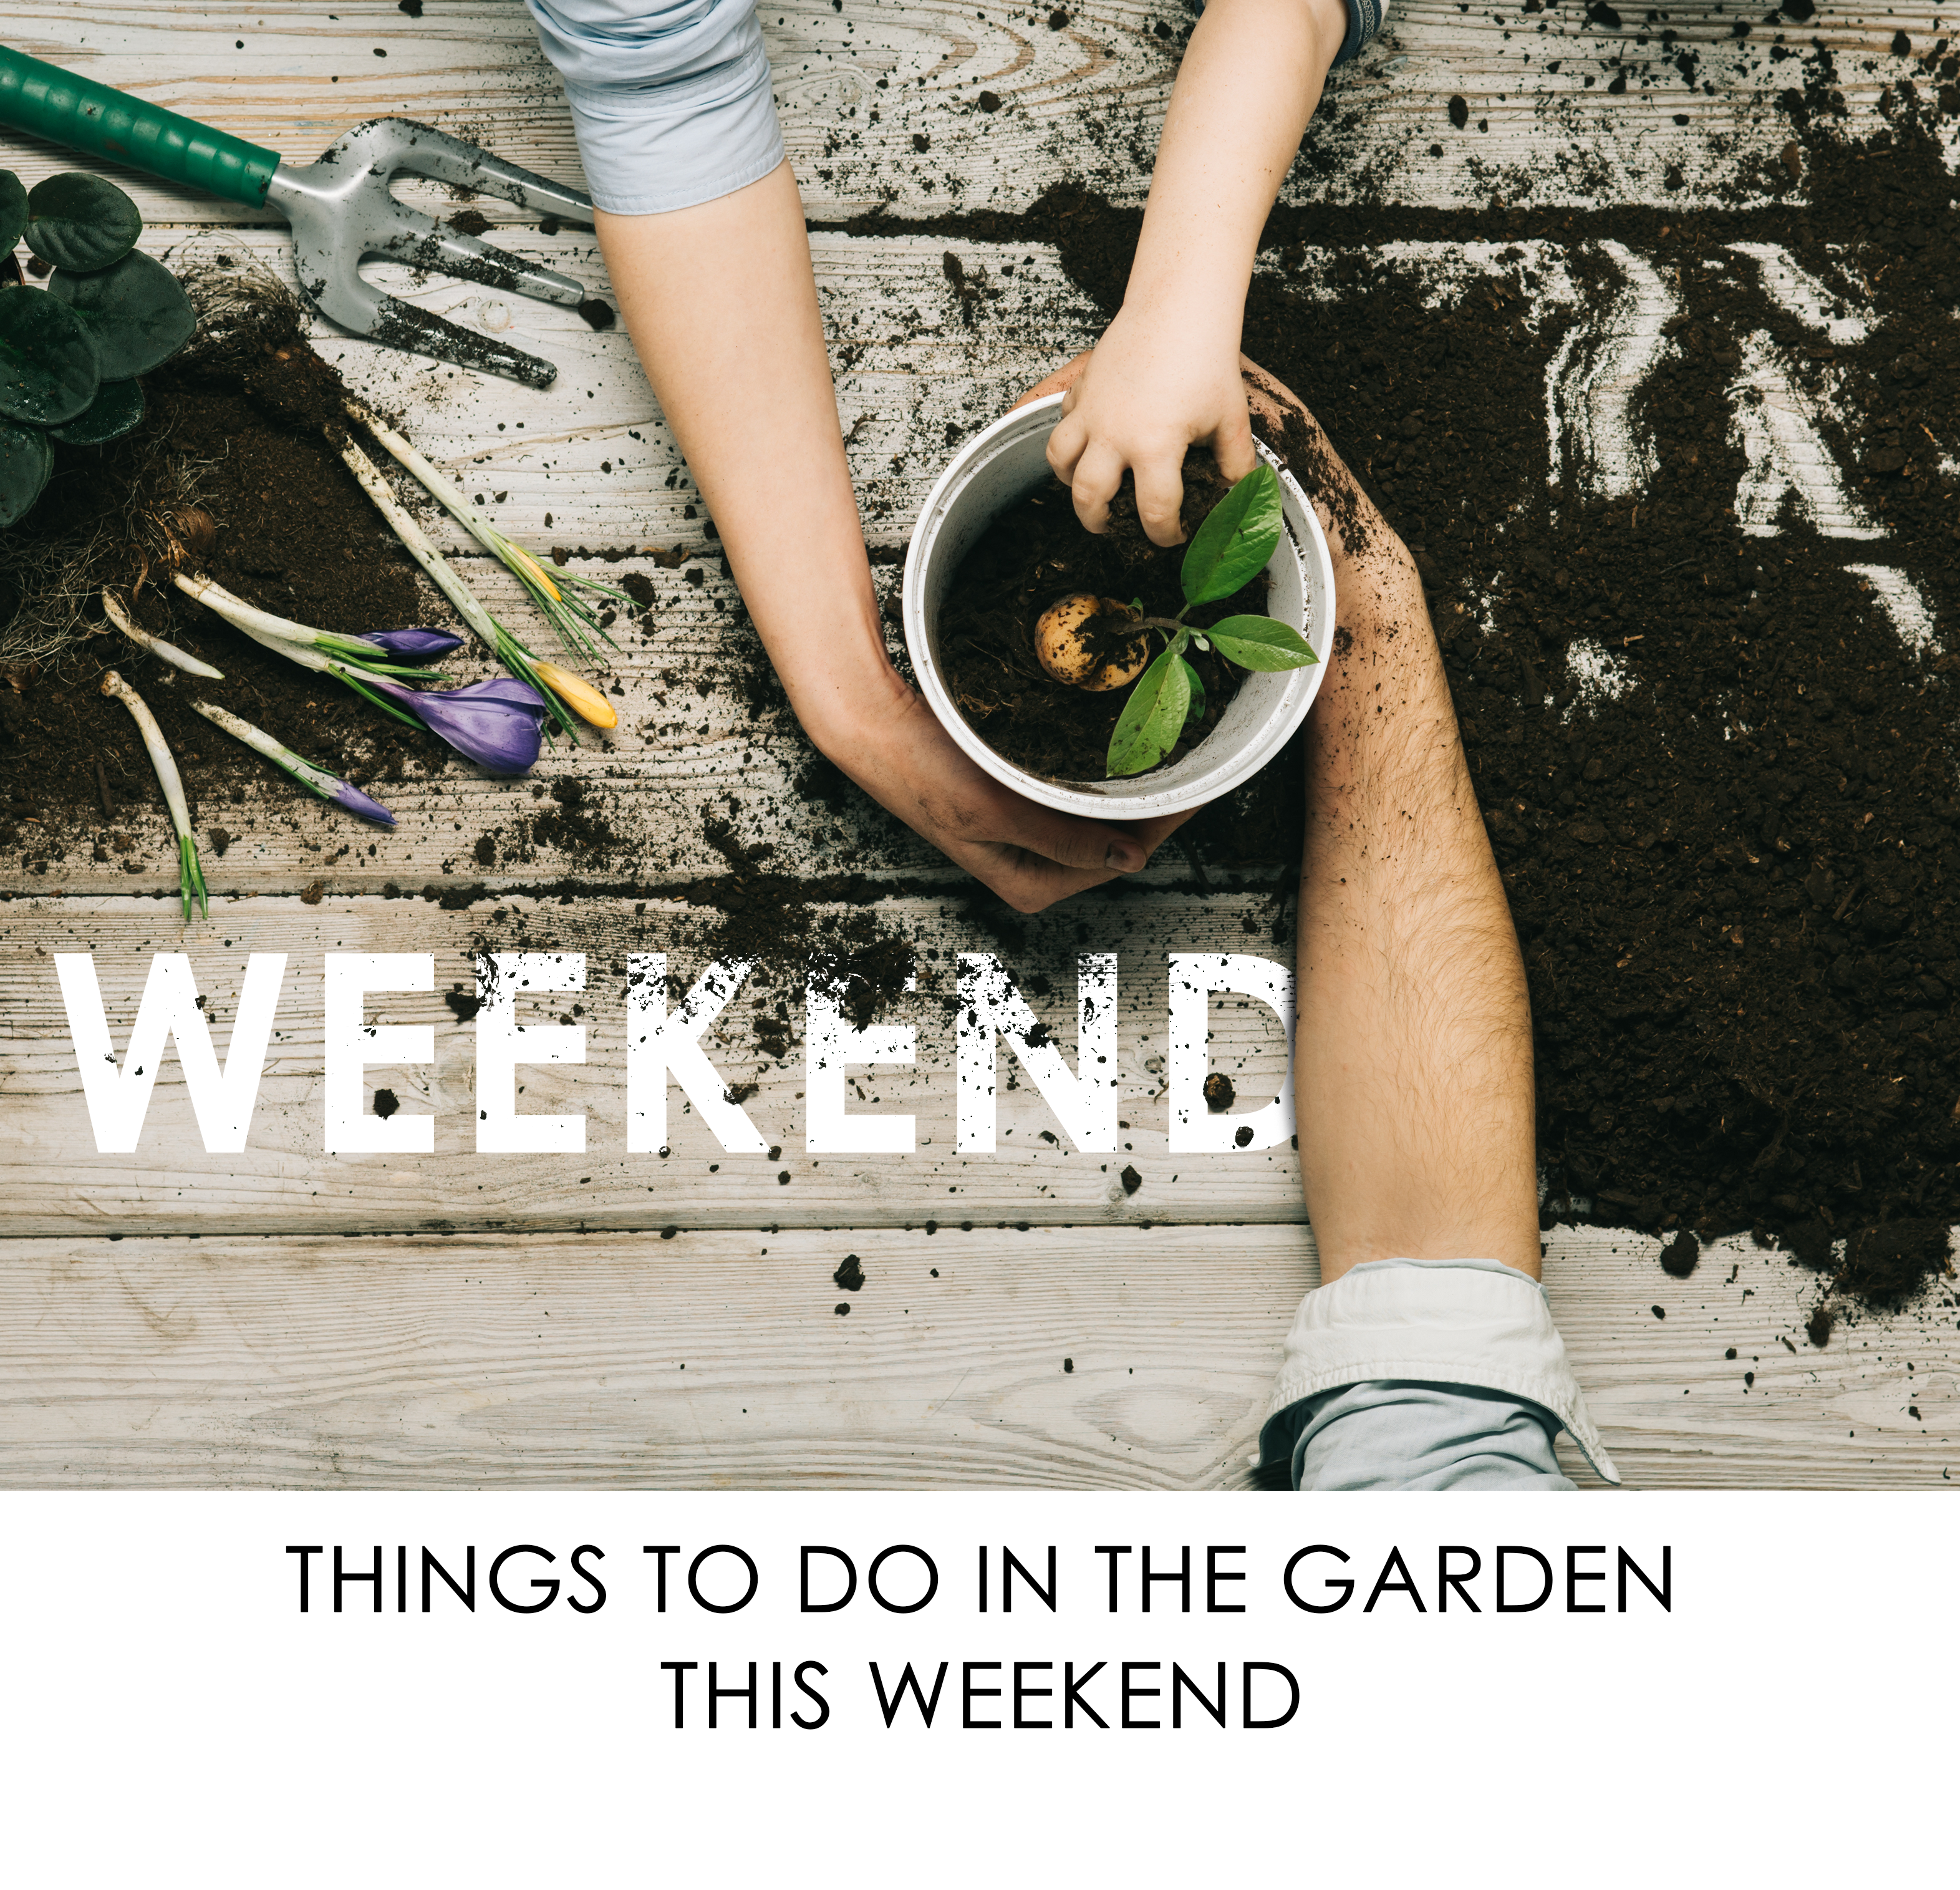 5 Things To Do In Your Garden Over The Weekend